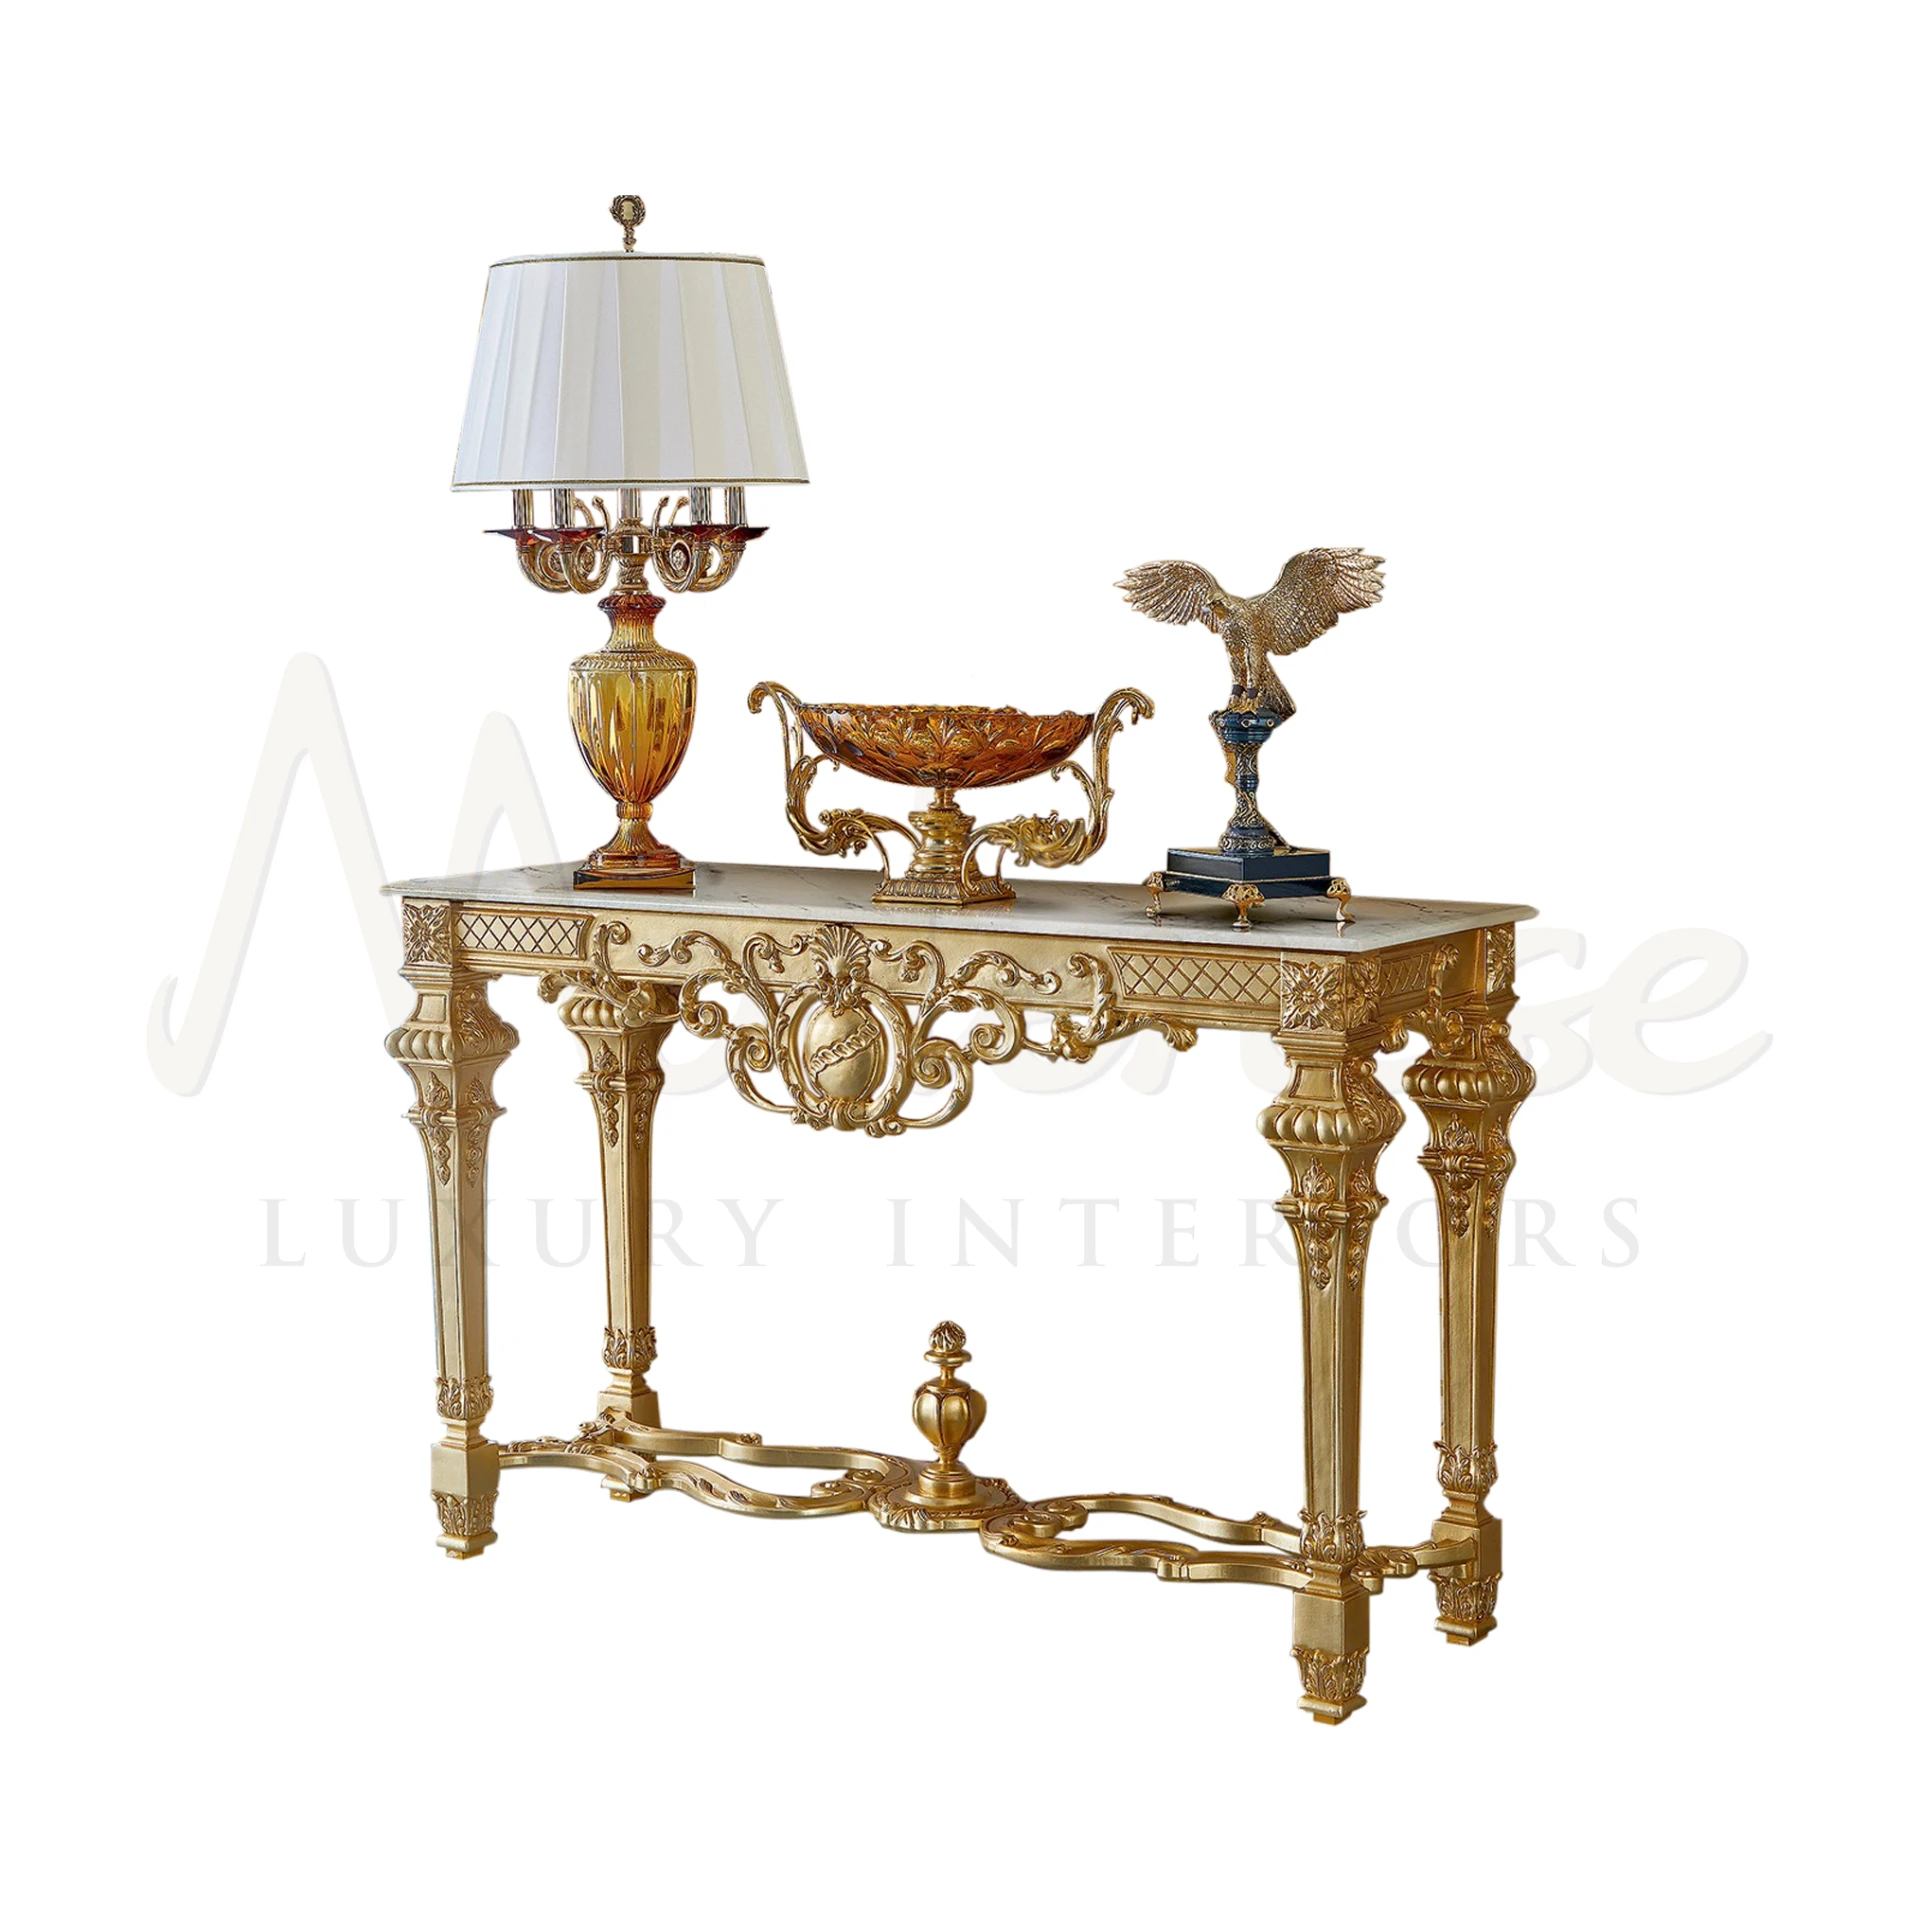 Luxurious Italian Neo-Classic Console with 24kt gold leaf finishing, embodying elegance and integrity in classic home decor